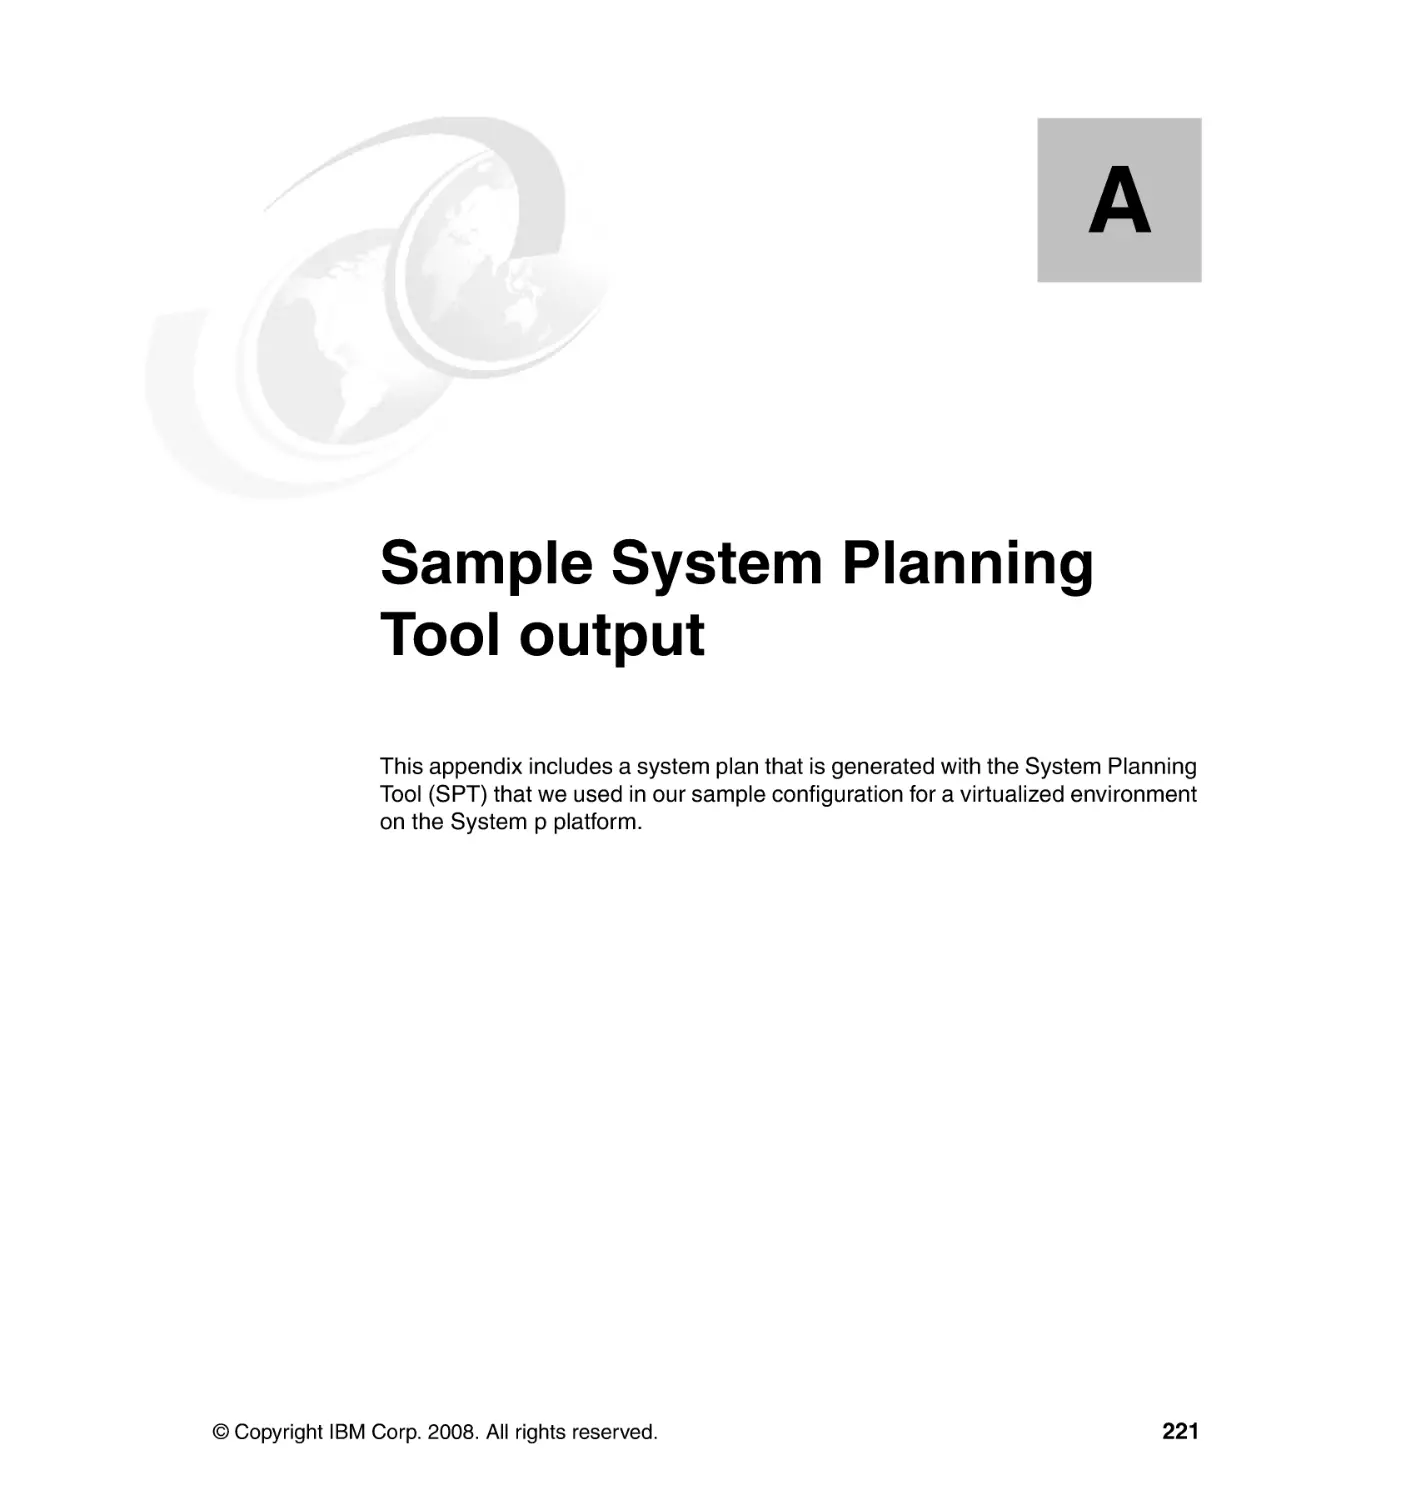 Appendix A. Sample System Planning Tool output